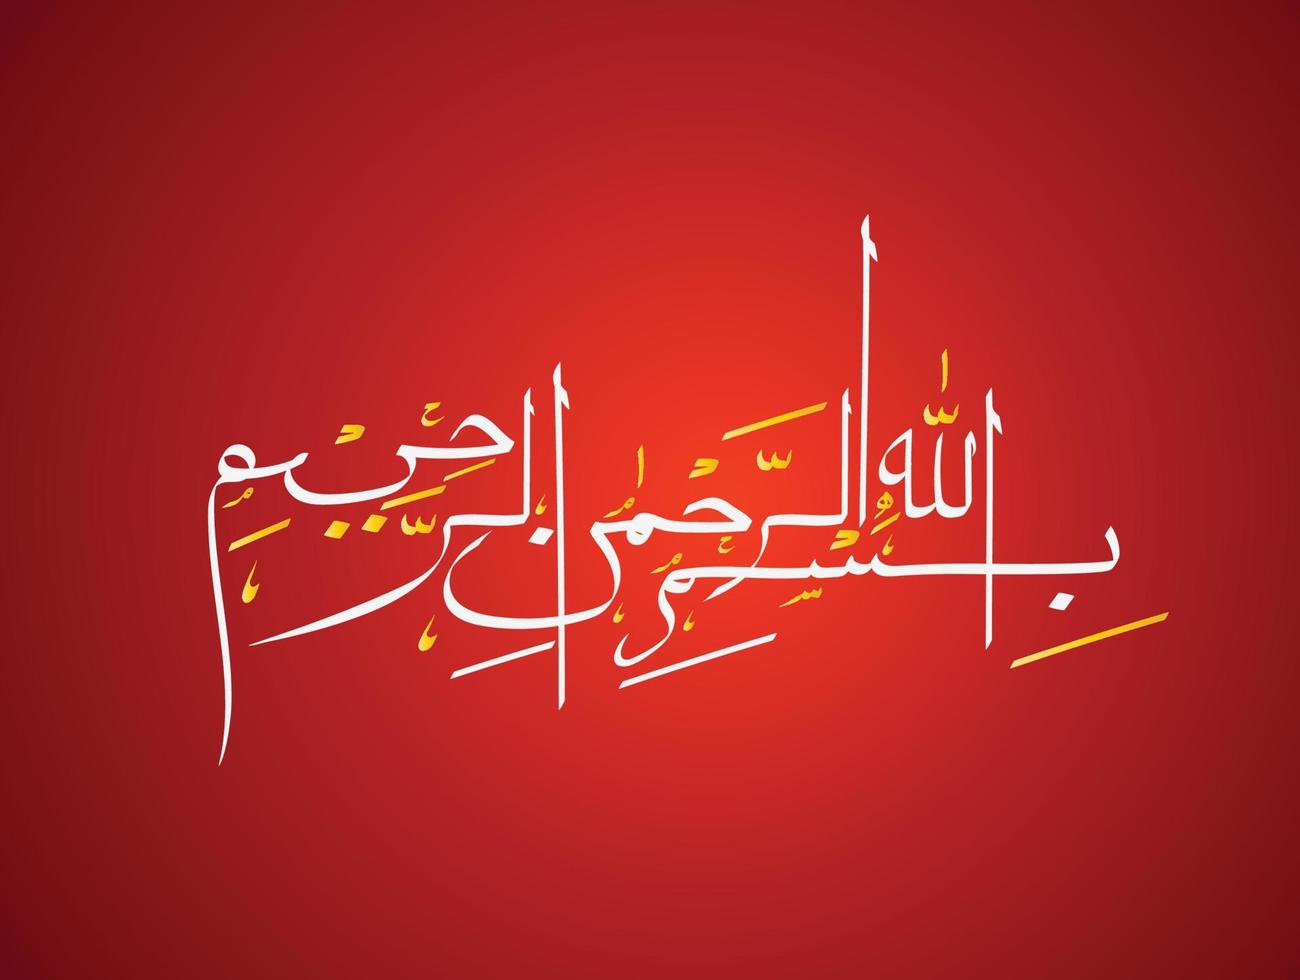 Bismillah In The Name Of Allah Arabic art  the first verse of Quran translated as In the name of God the merciful the compassionate in Naskh Calligraphy Islamic Vector. vector